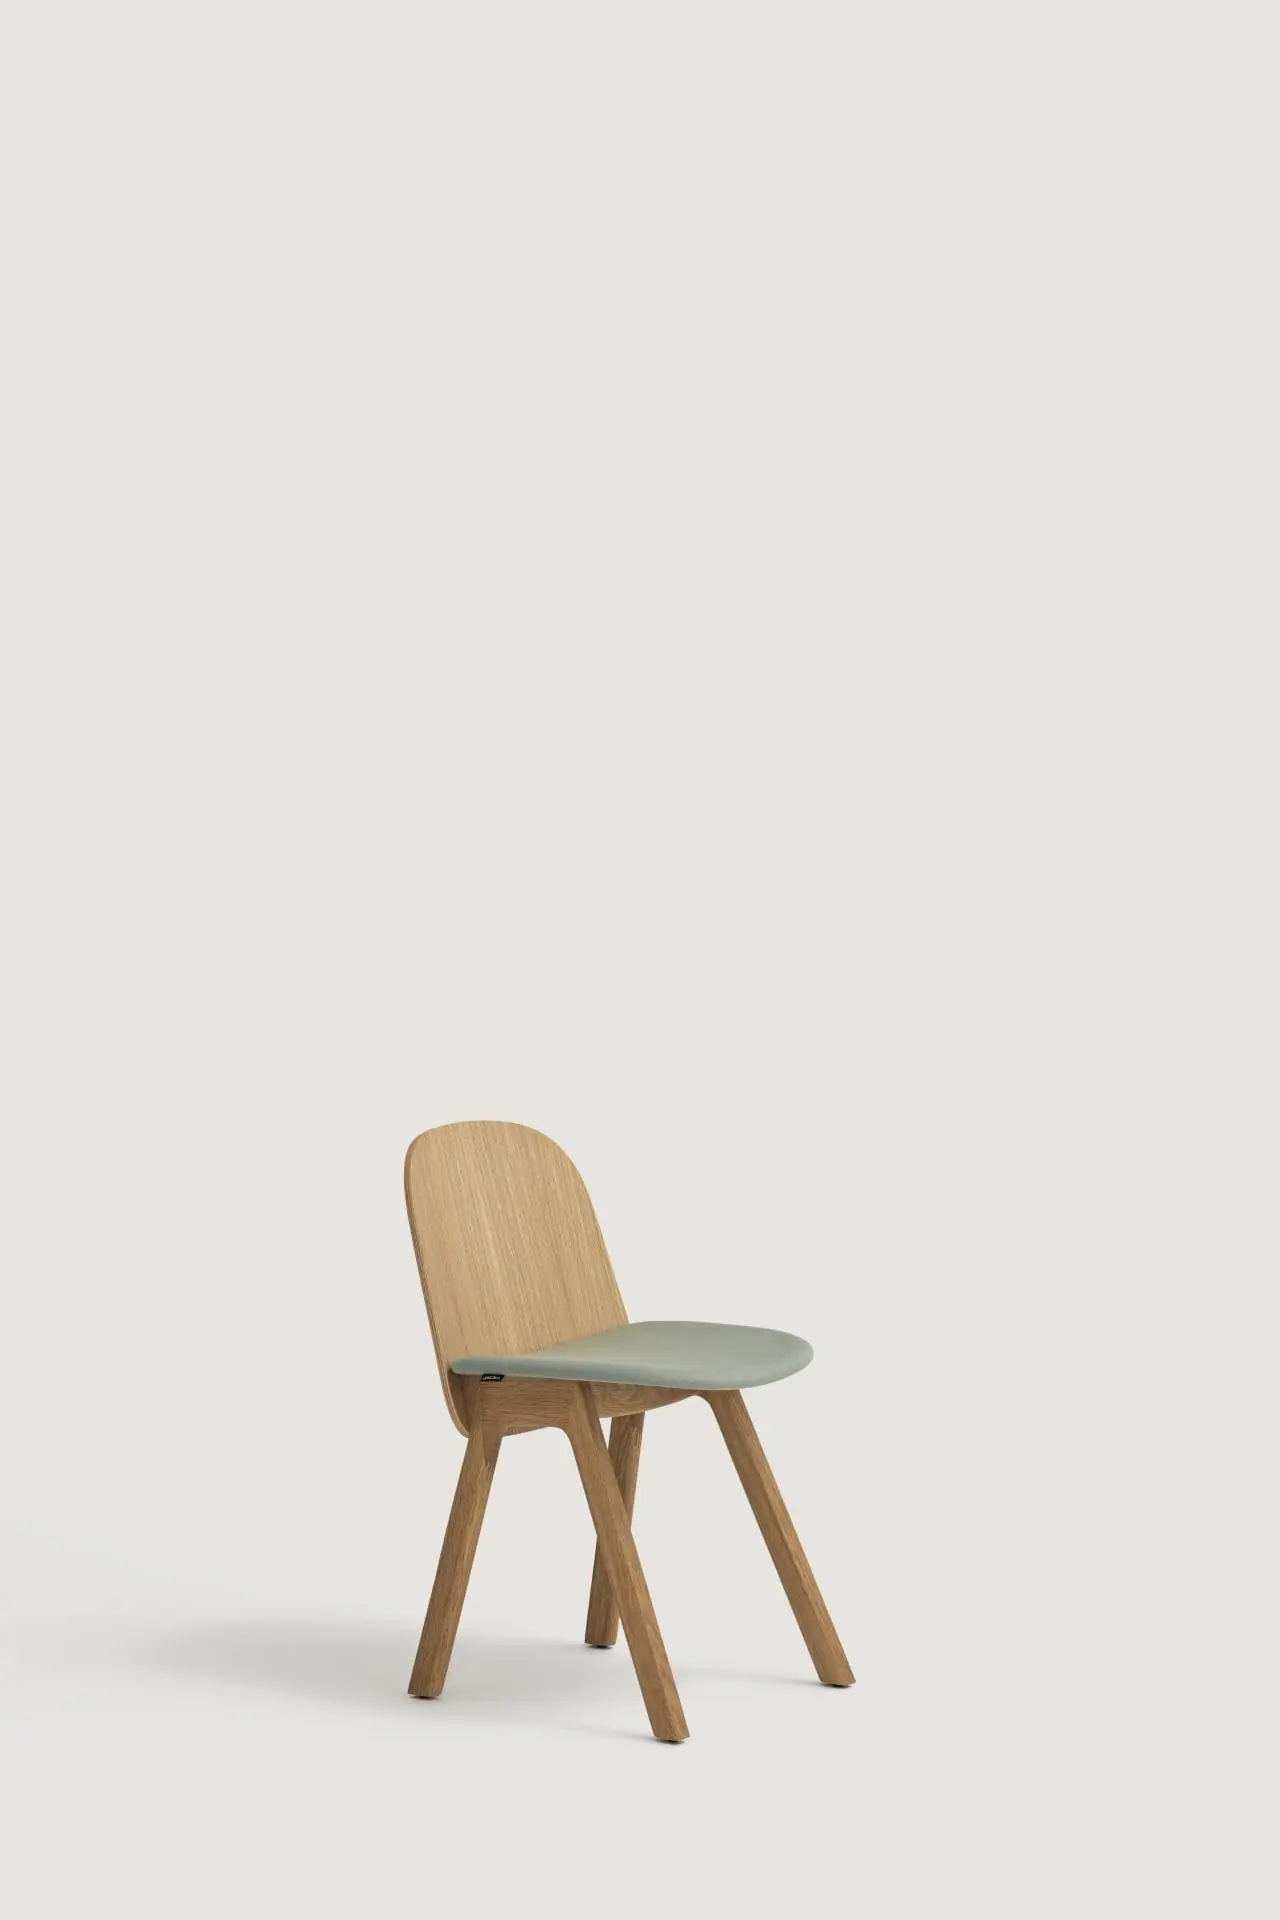 capdell-wedge-chair-04